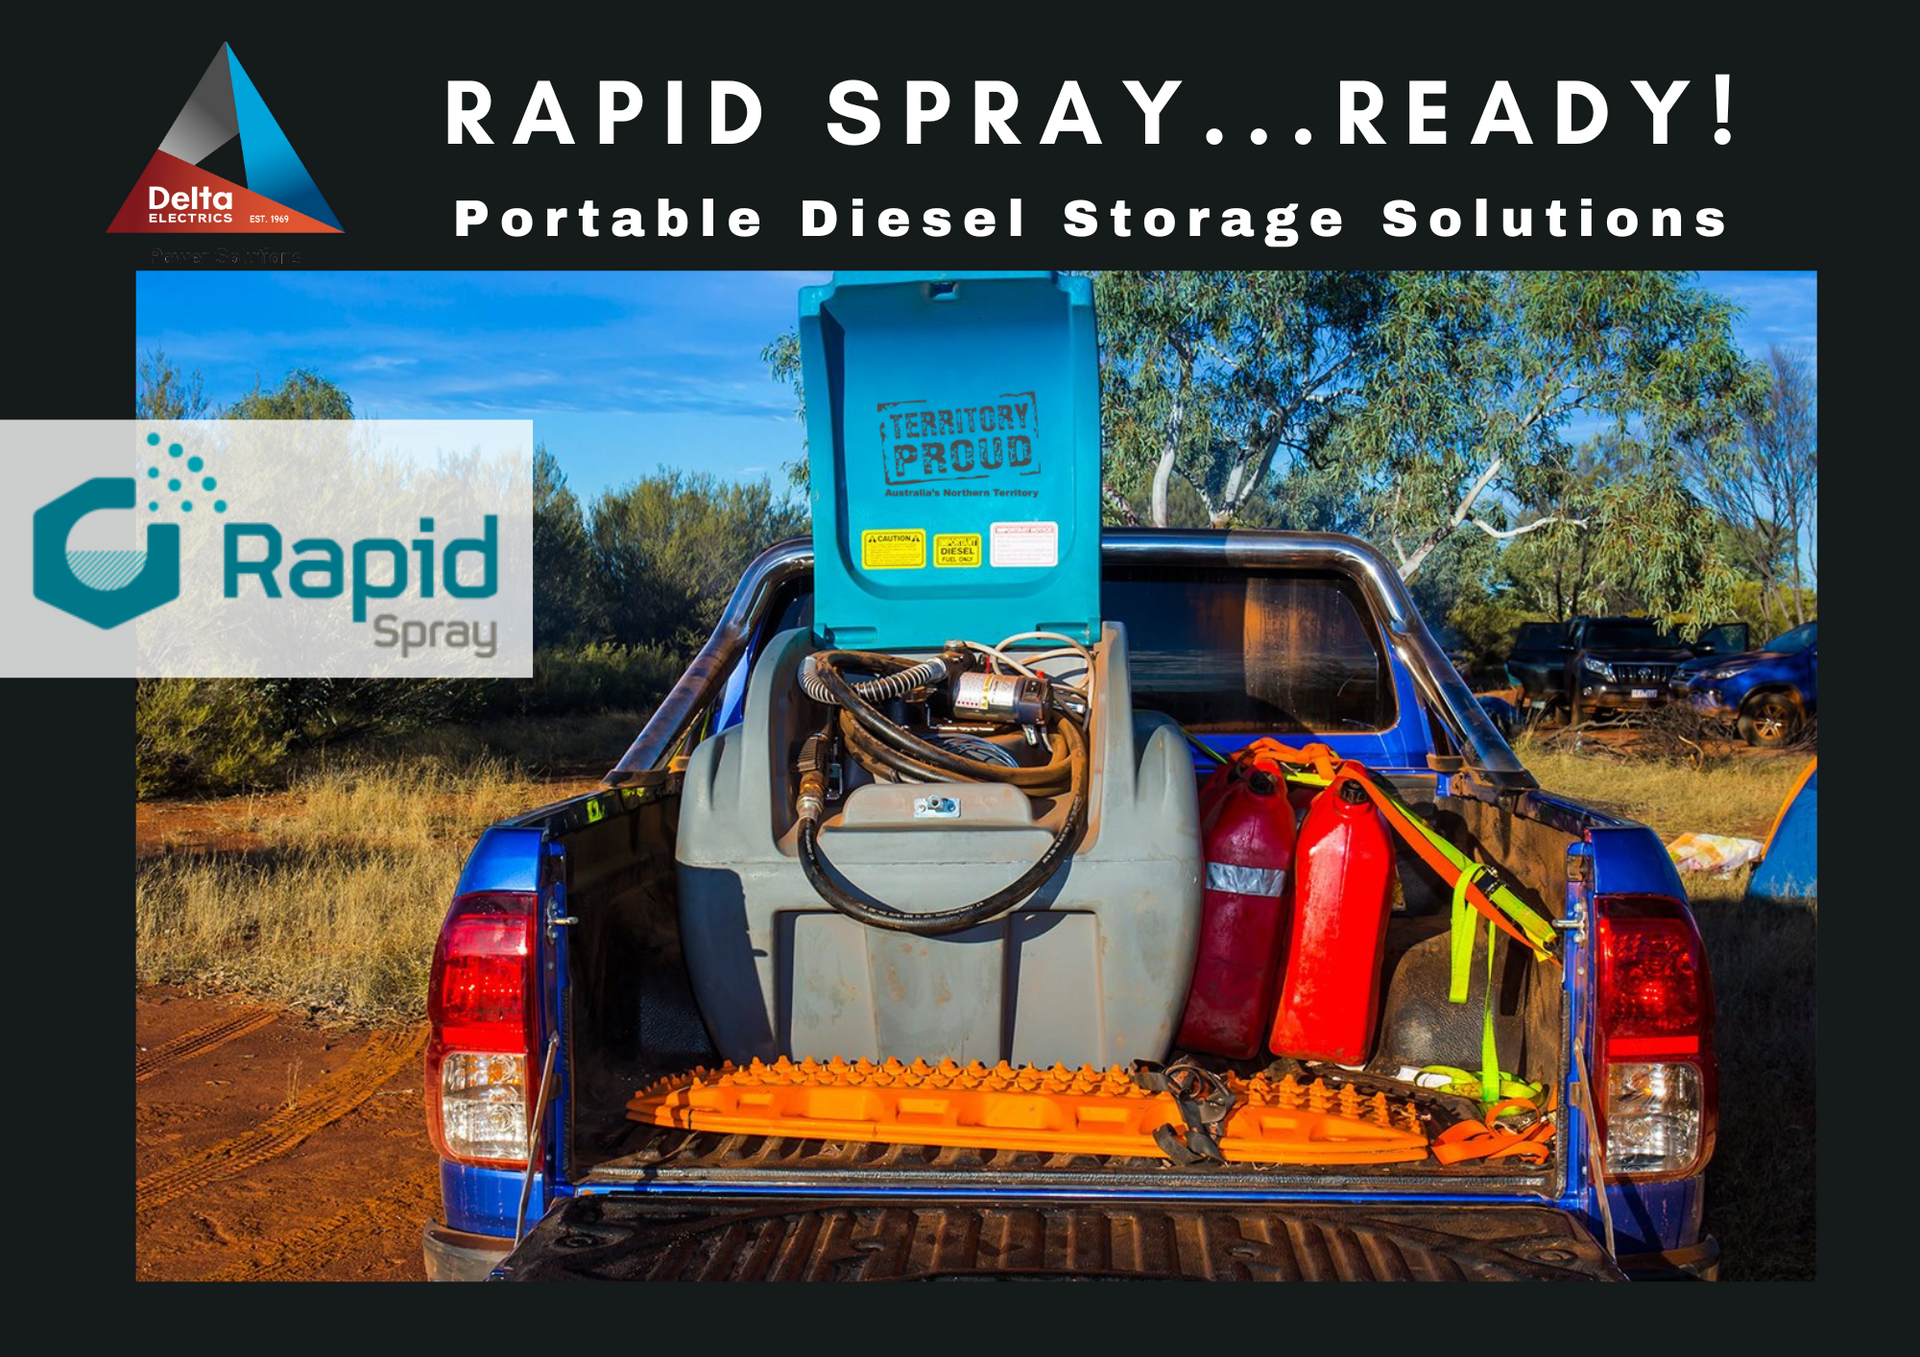 an ad for rapid spray portable diesel storage solutions